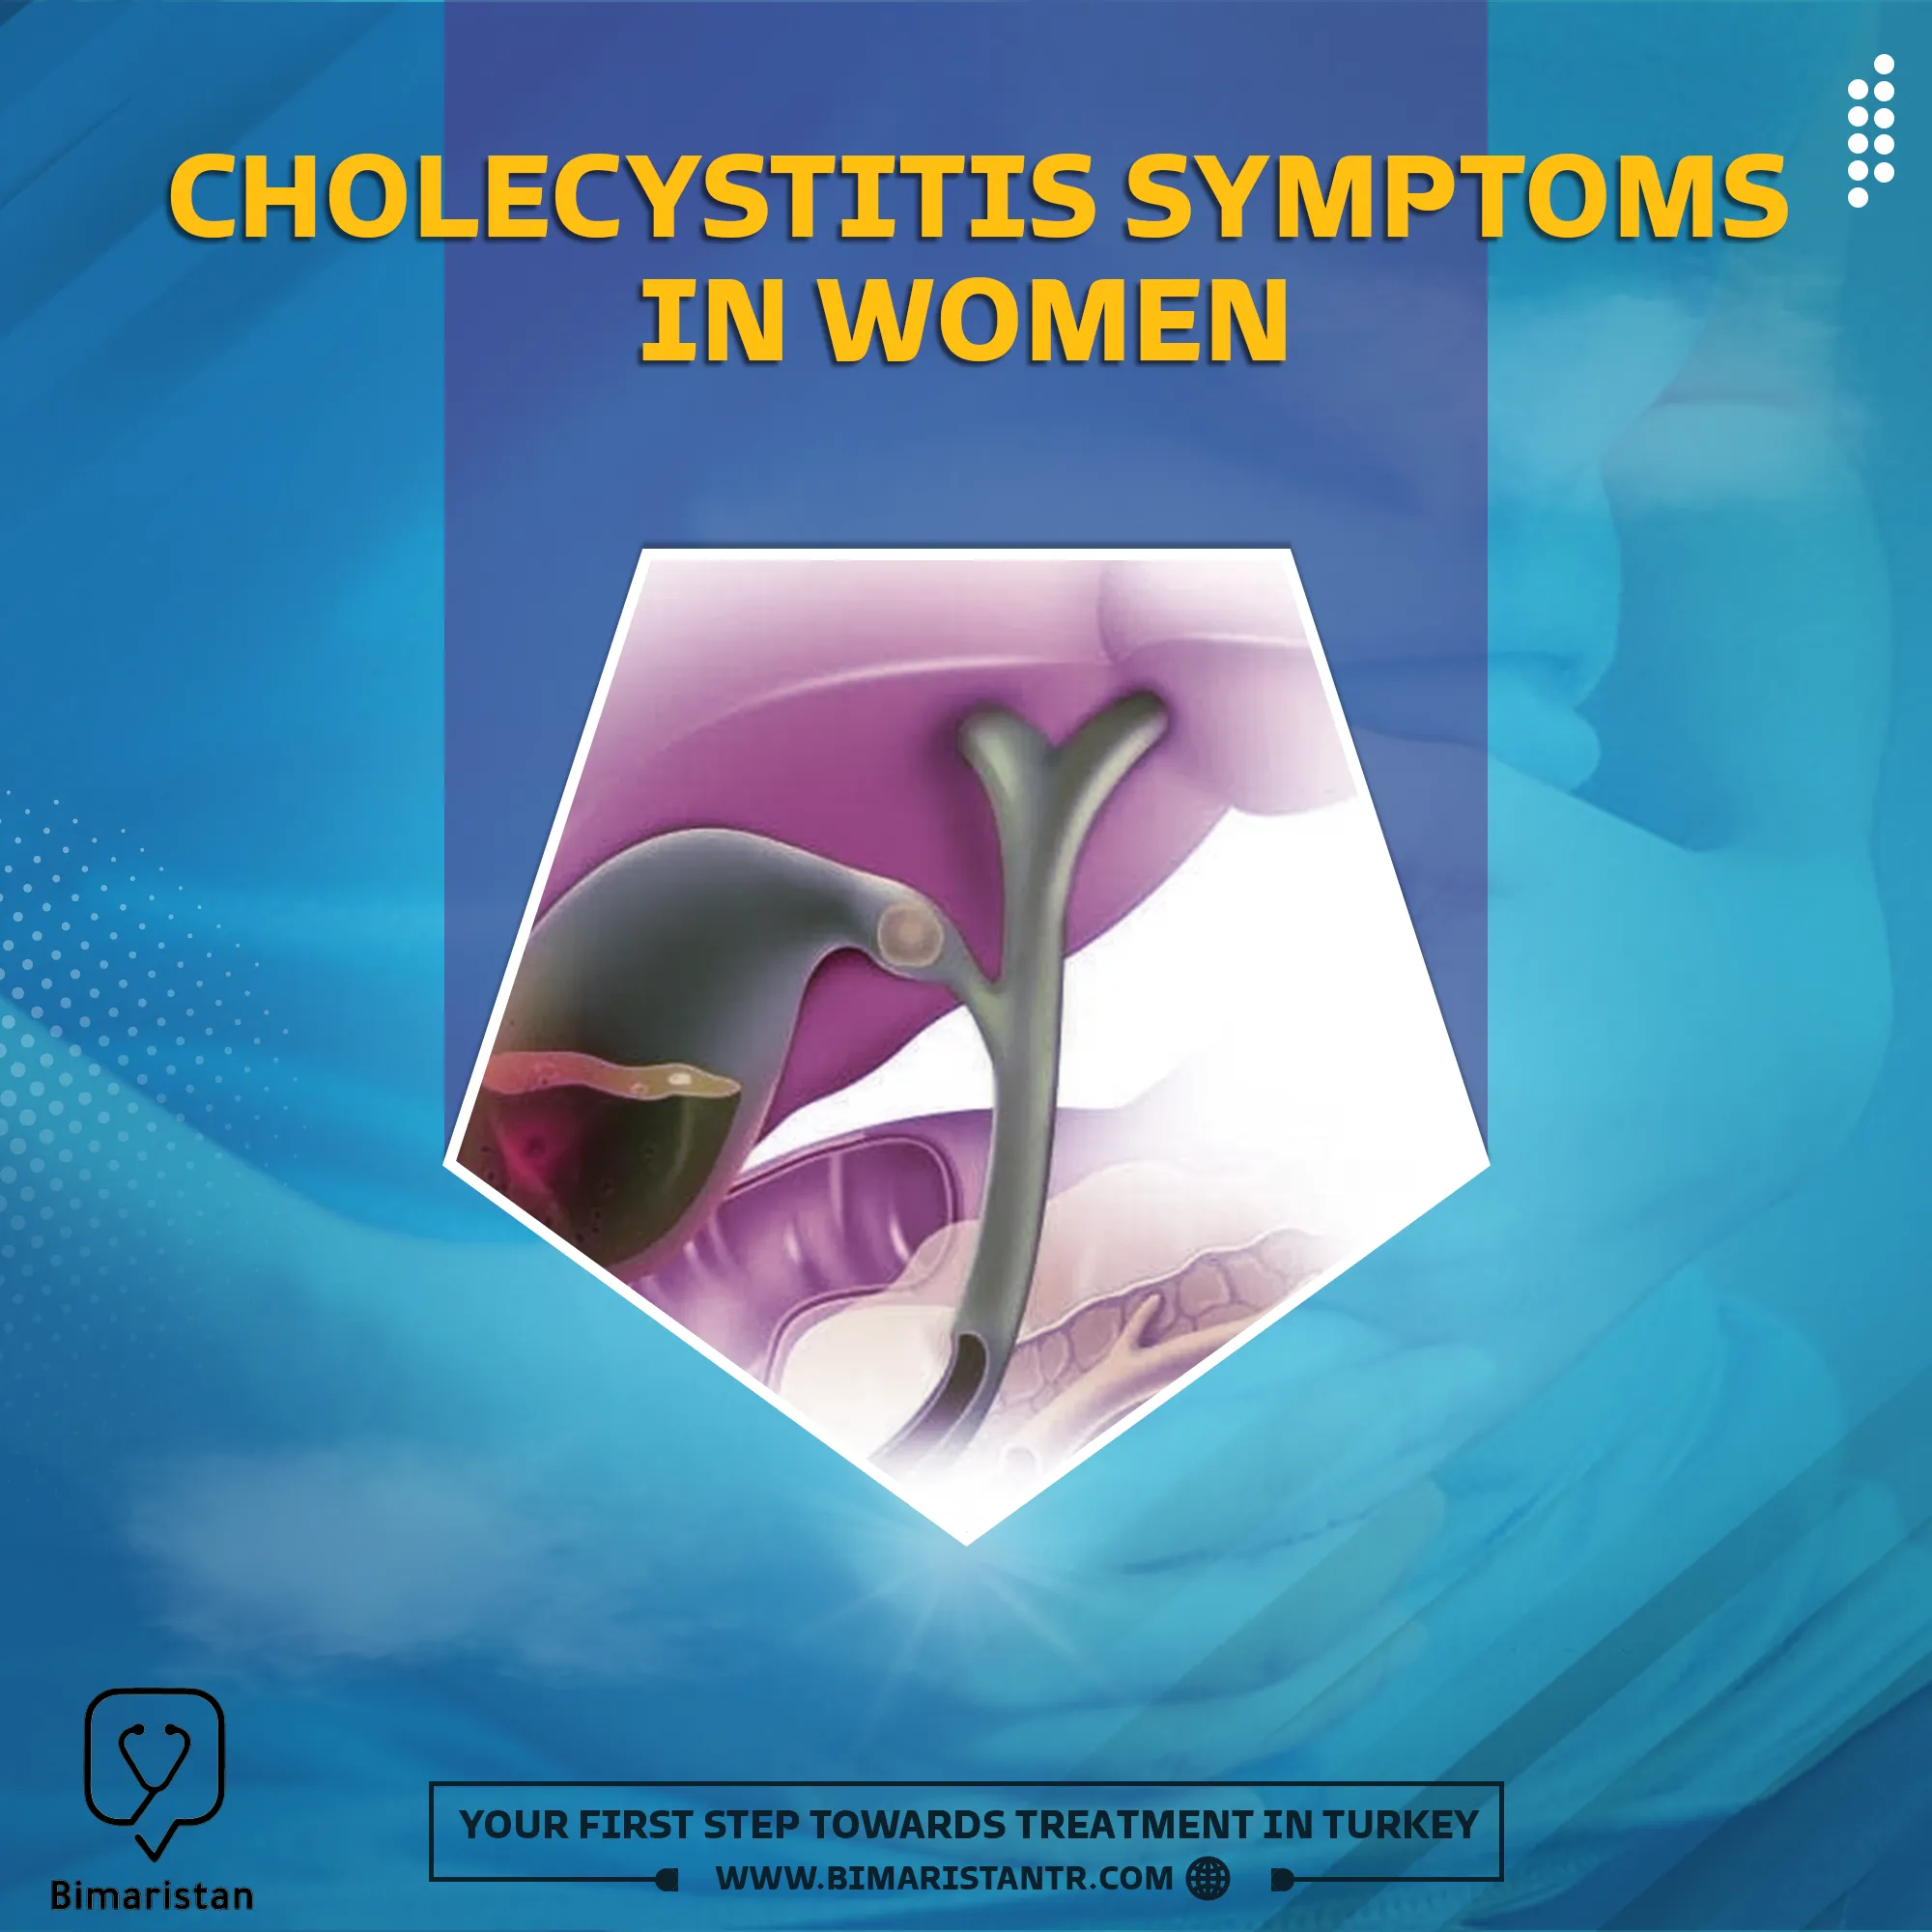 Symptoms of cholecystitis in women and how to treat it